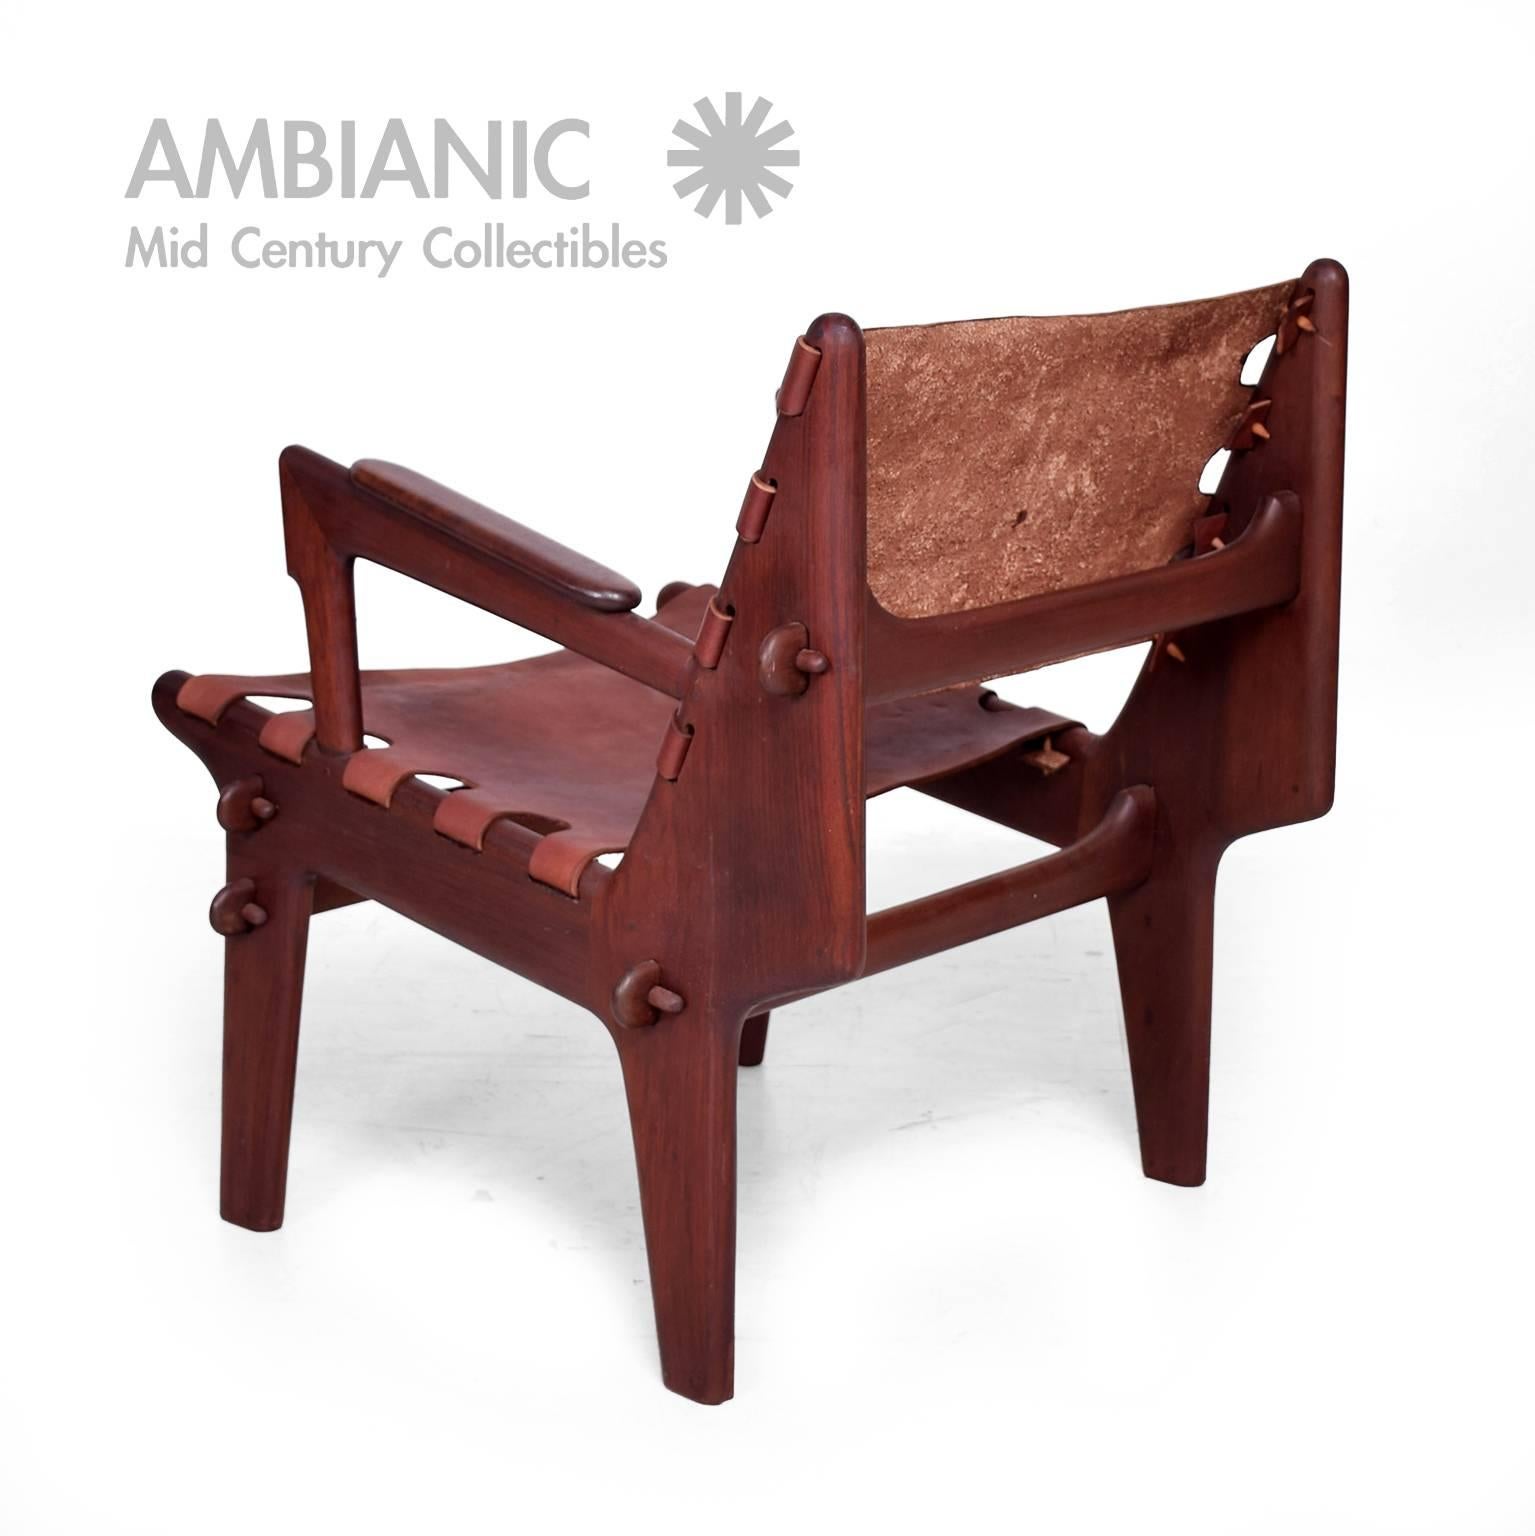 For your consideration a pair of Safari chairs by Angel Pazmino.
Made in Ecuador, circa 1960s.

Leather and solid wood. Unmarked.
Dimensions:
29